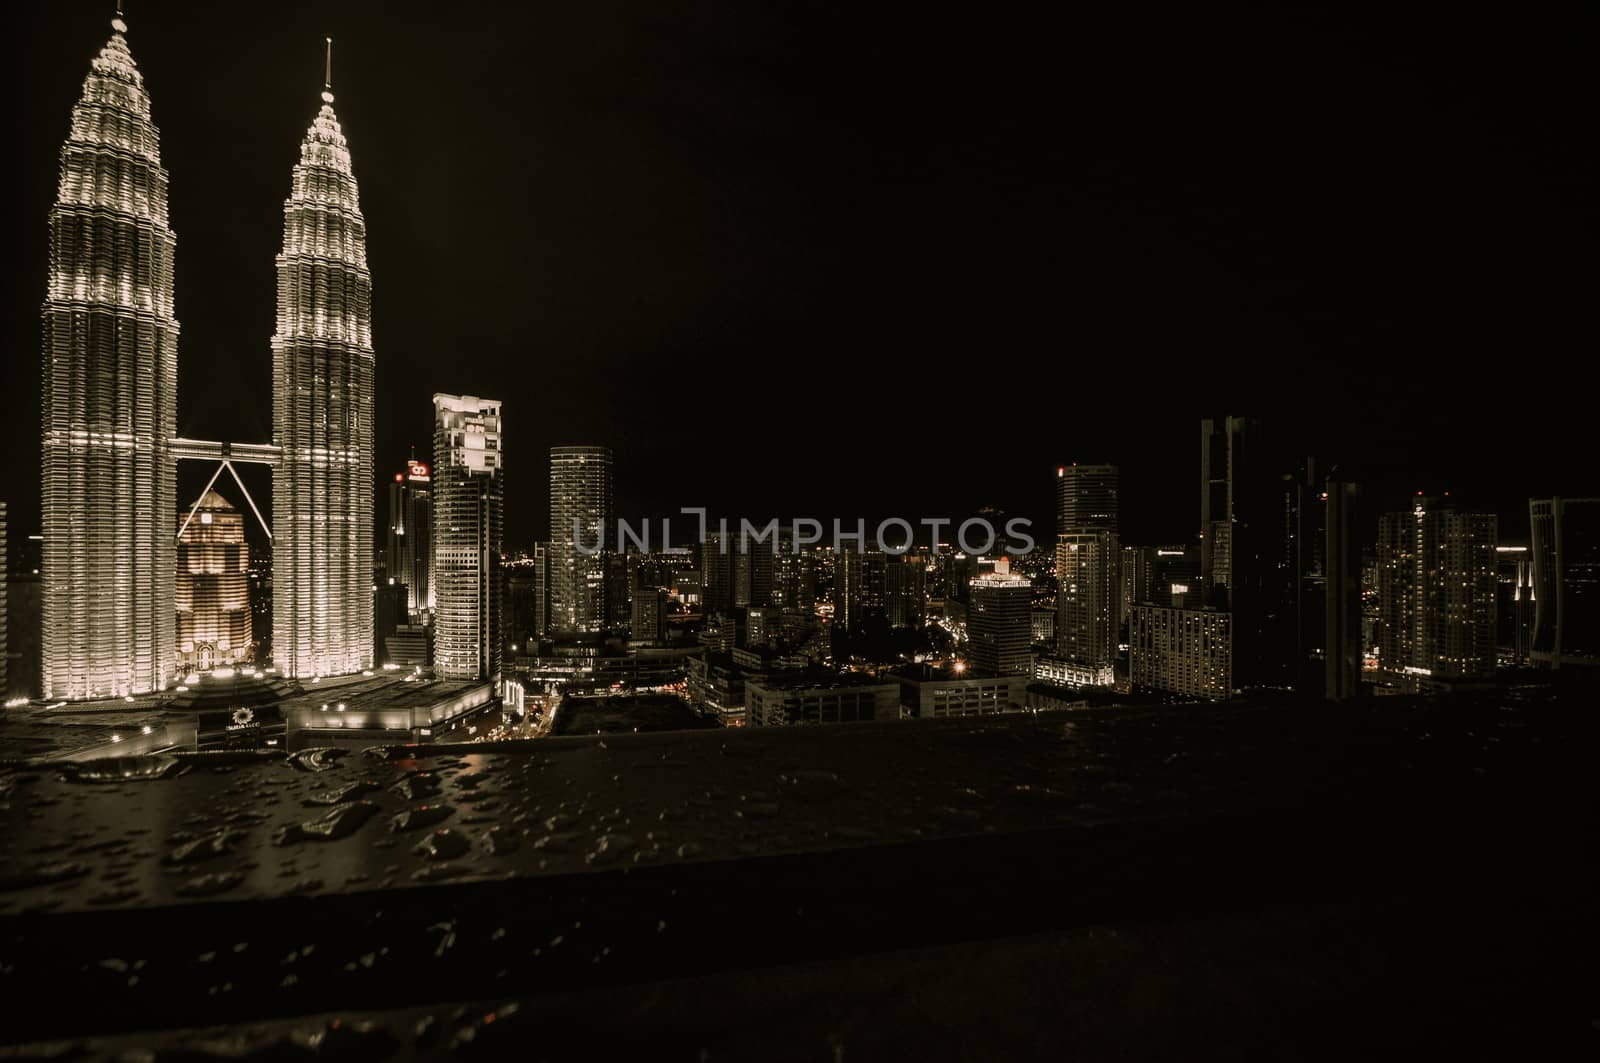 KUALA LUMPUR - APRIL 10: General view of Petronas Twin Towers at by weltreisendertj